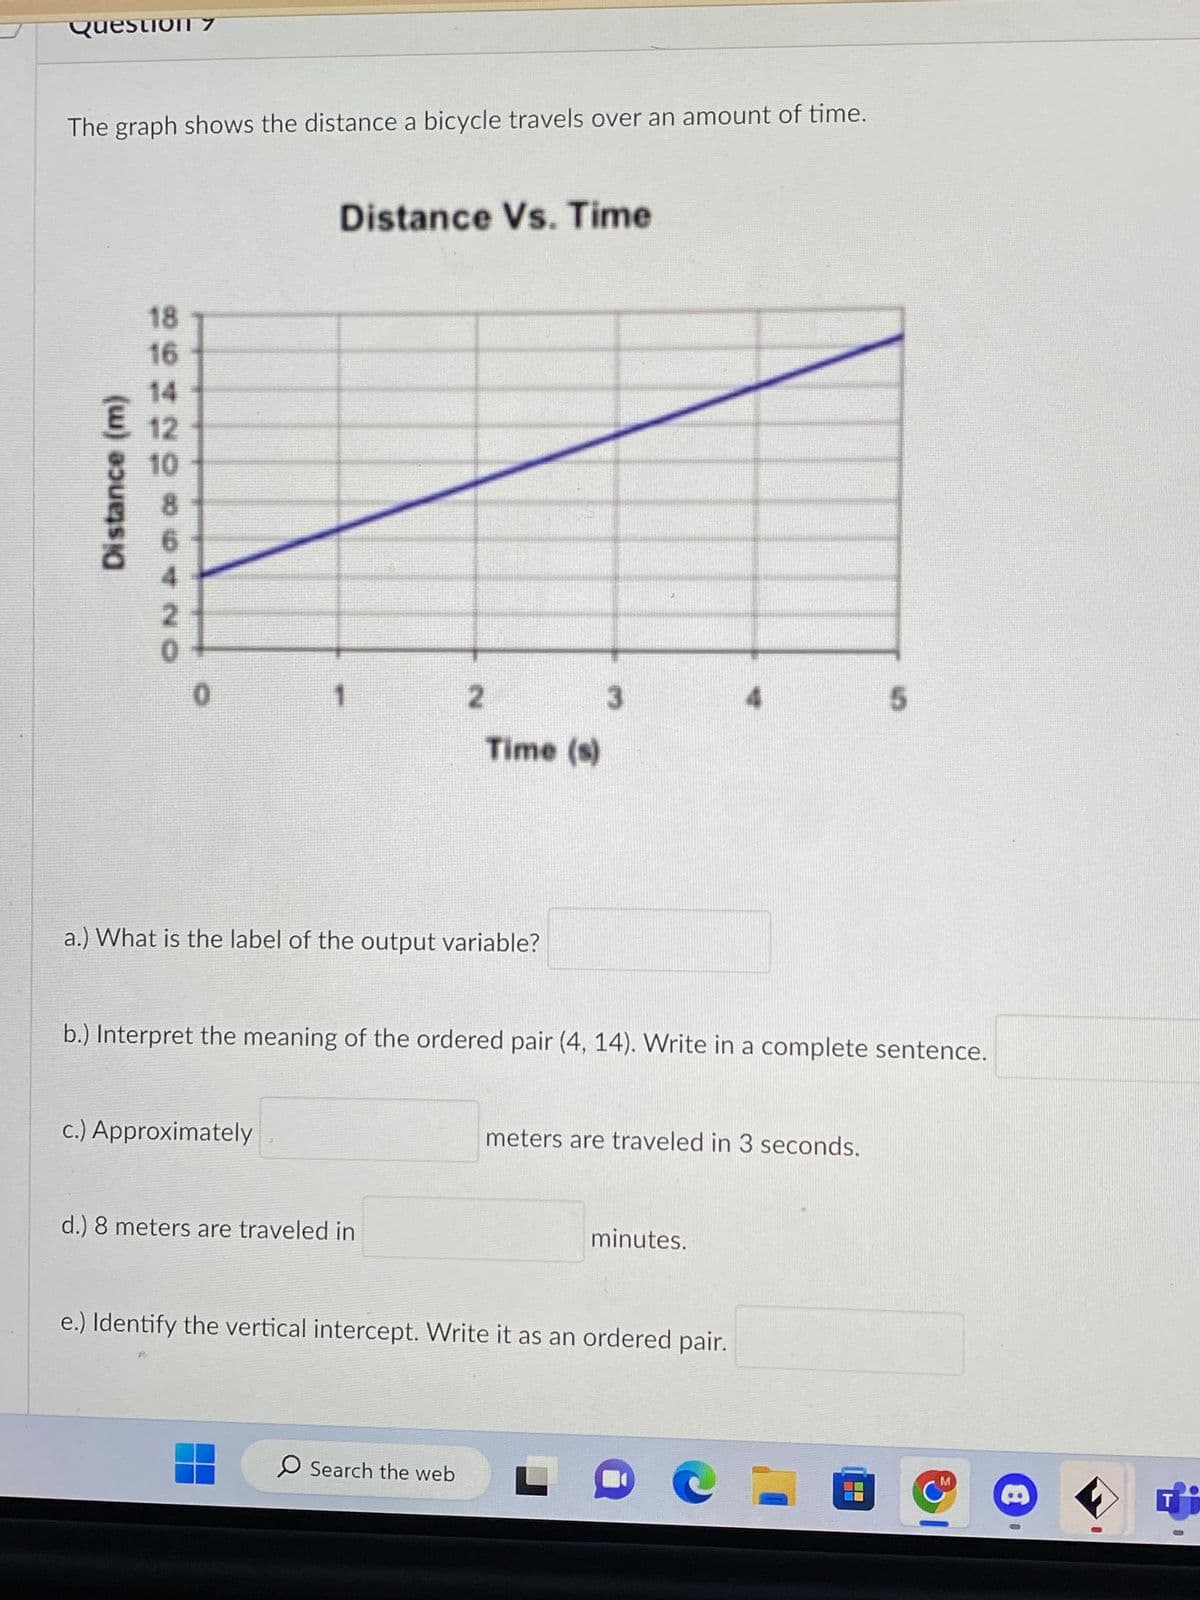 Question 7
The graph shows the distance a bicycle travels over an amount of time.
Distance (m)
18
16
12
10
8
2
0
0
Distance Vs. Time
c.) Approximately
a.) What is the label of the output variable?
2
d.) 8 meters are traveled in
Time (s)
b.) Interpret the meaning of the ordered pair (4, 14). Write in a complete sentence.
O Search the web
3
meters are traveled in 3 seconds.
minutes.
e.) Identify the vertical intercept. Write it as an ordered pair.
5
D
M
8
0